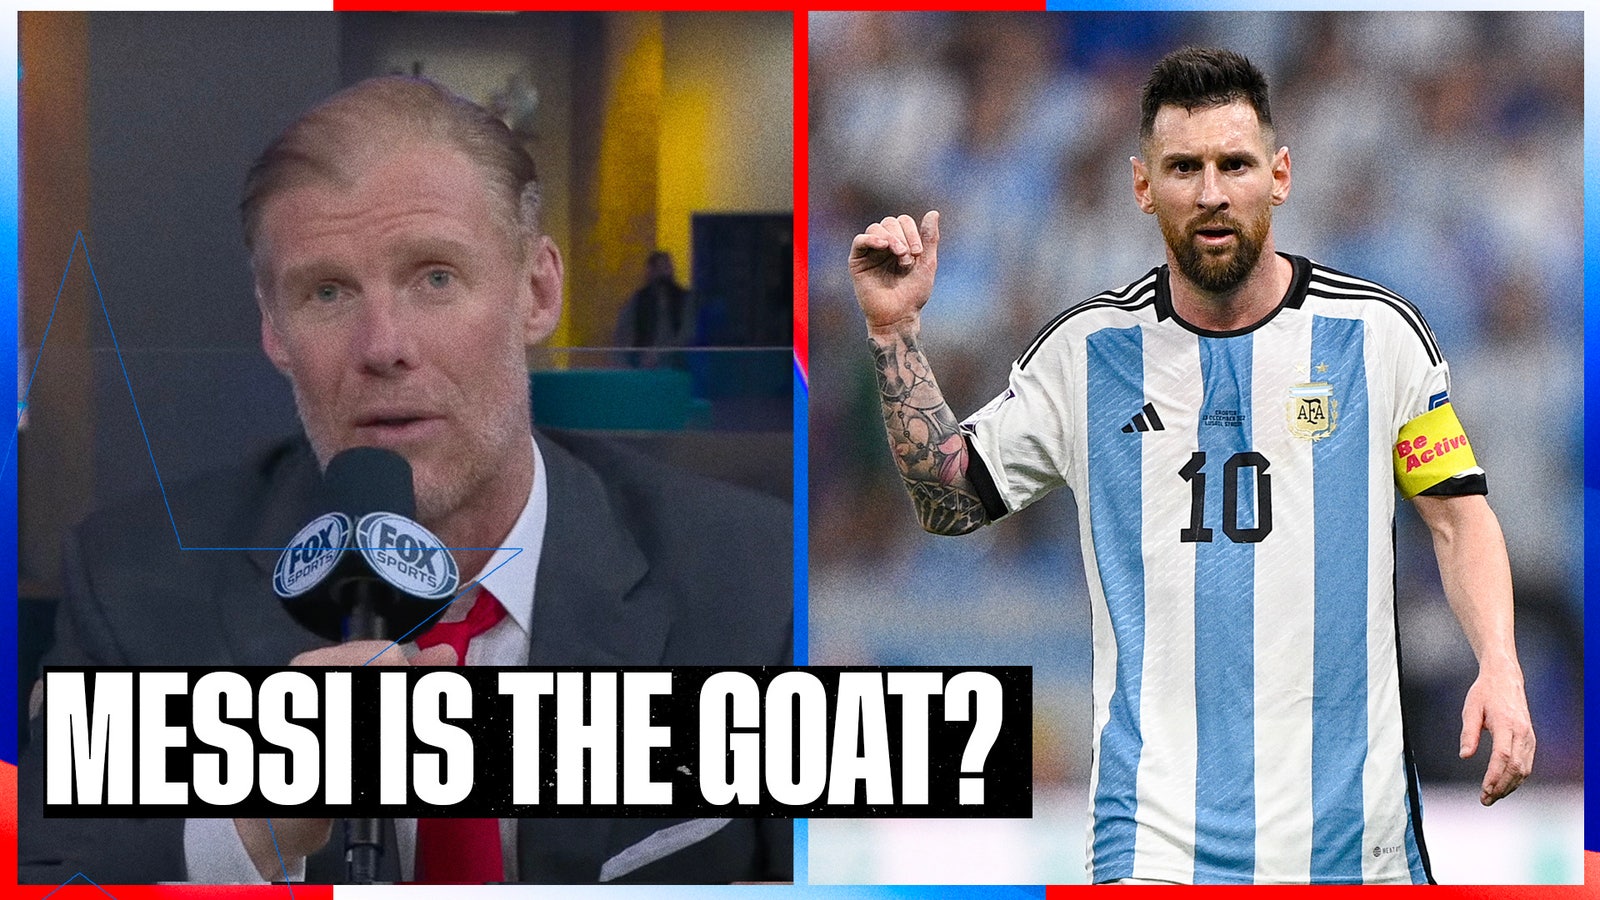 Did Argentina's Lionel Messi prove he is the GOAT after victory against Croatia?